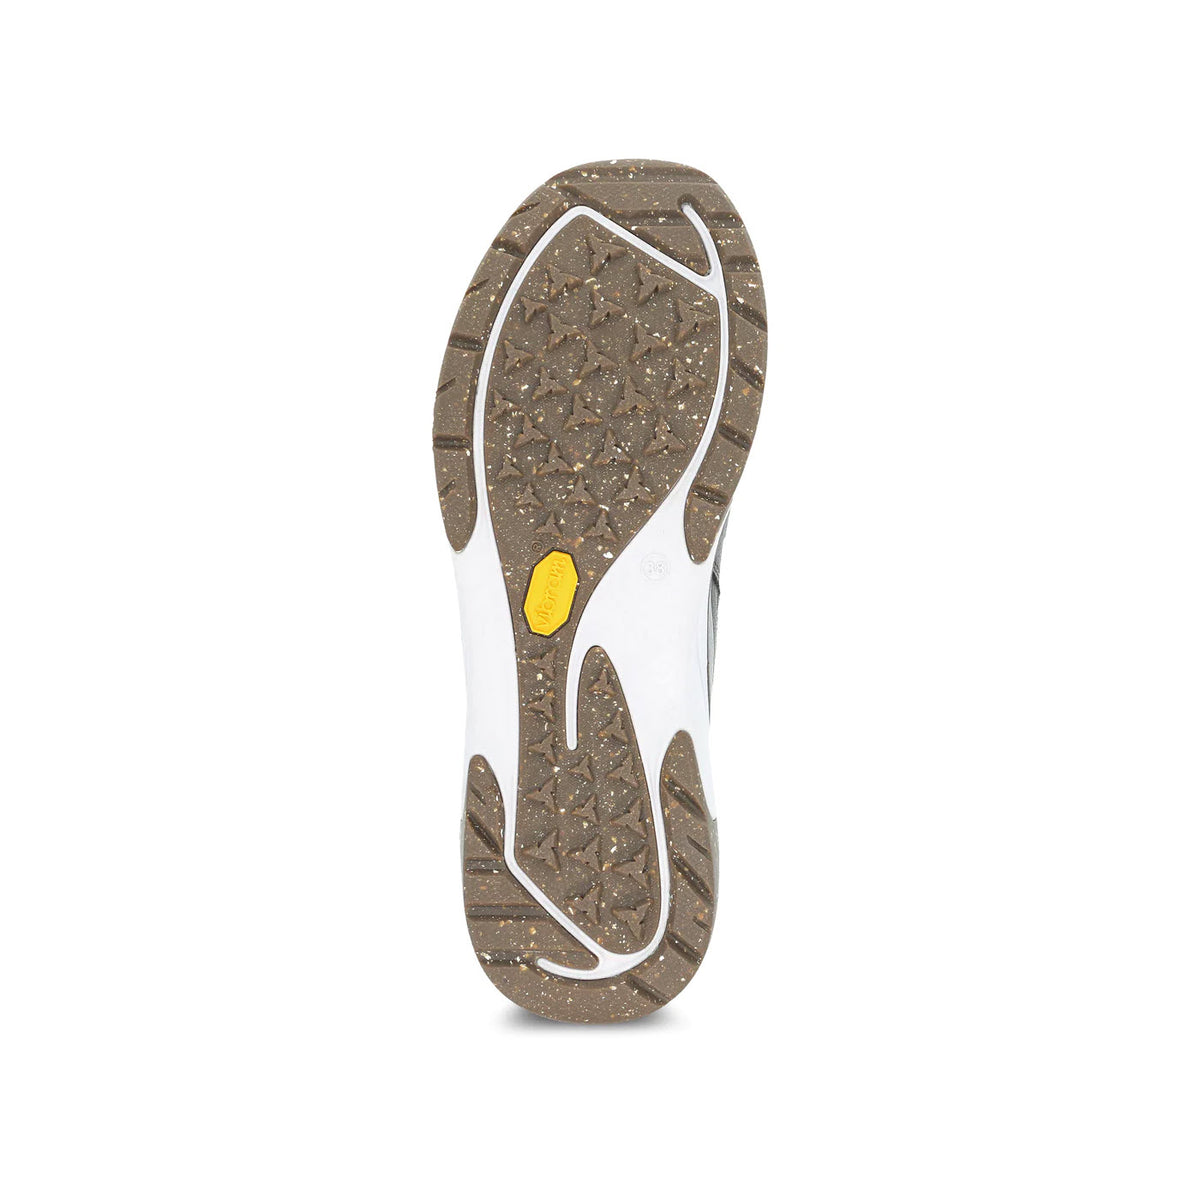 Sole of a white athletic shoe with transparent sections revealing brown speckled material, featuring a yellow oval detail and a Vibram ECOSTEP outsole, like the Dansko Margo Morel Burnished - Womens.